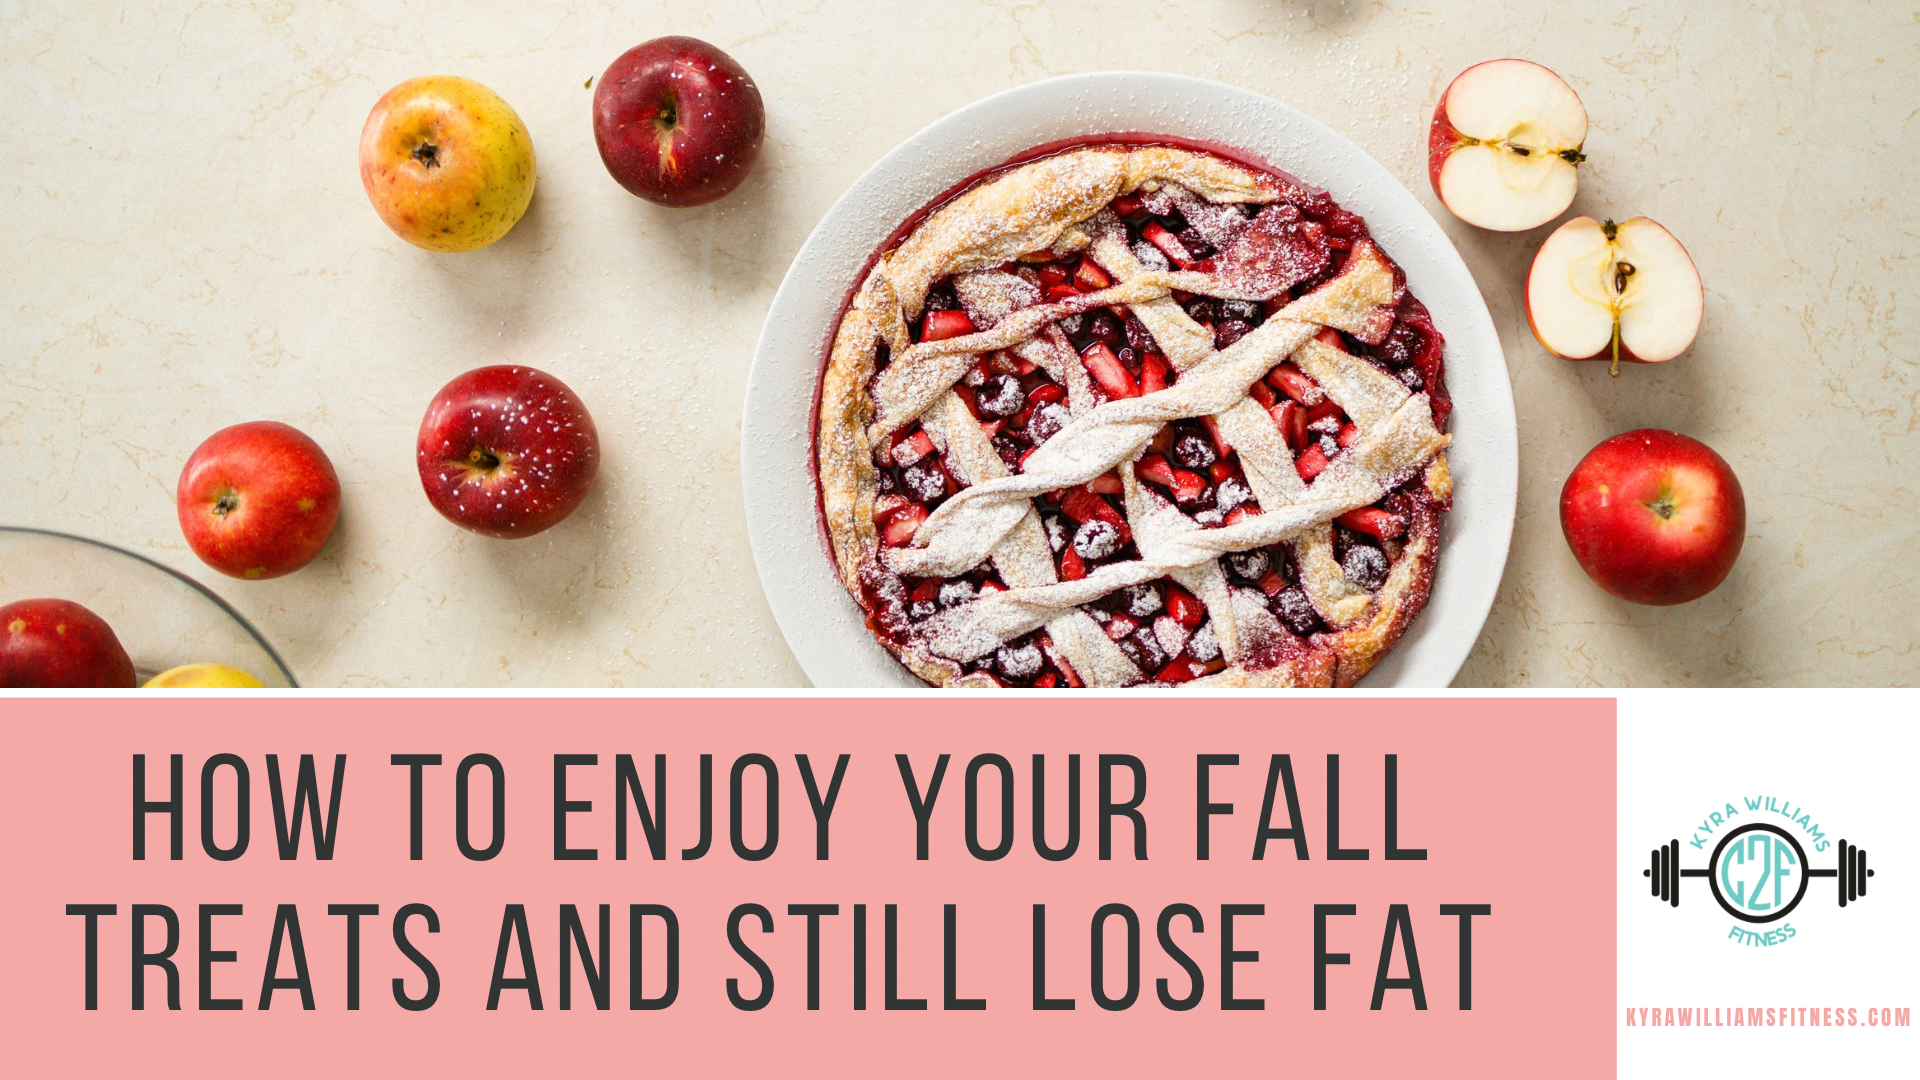 How to Enjoy Your Fall Treats and Still Lose Fat